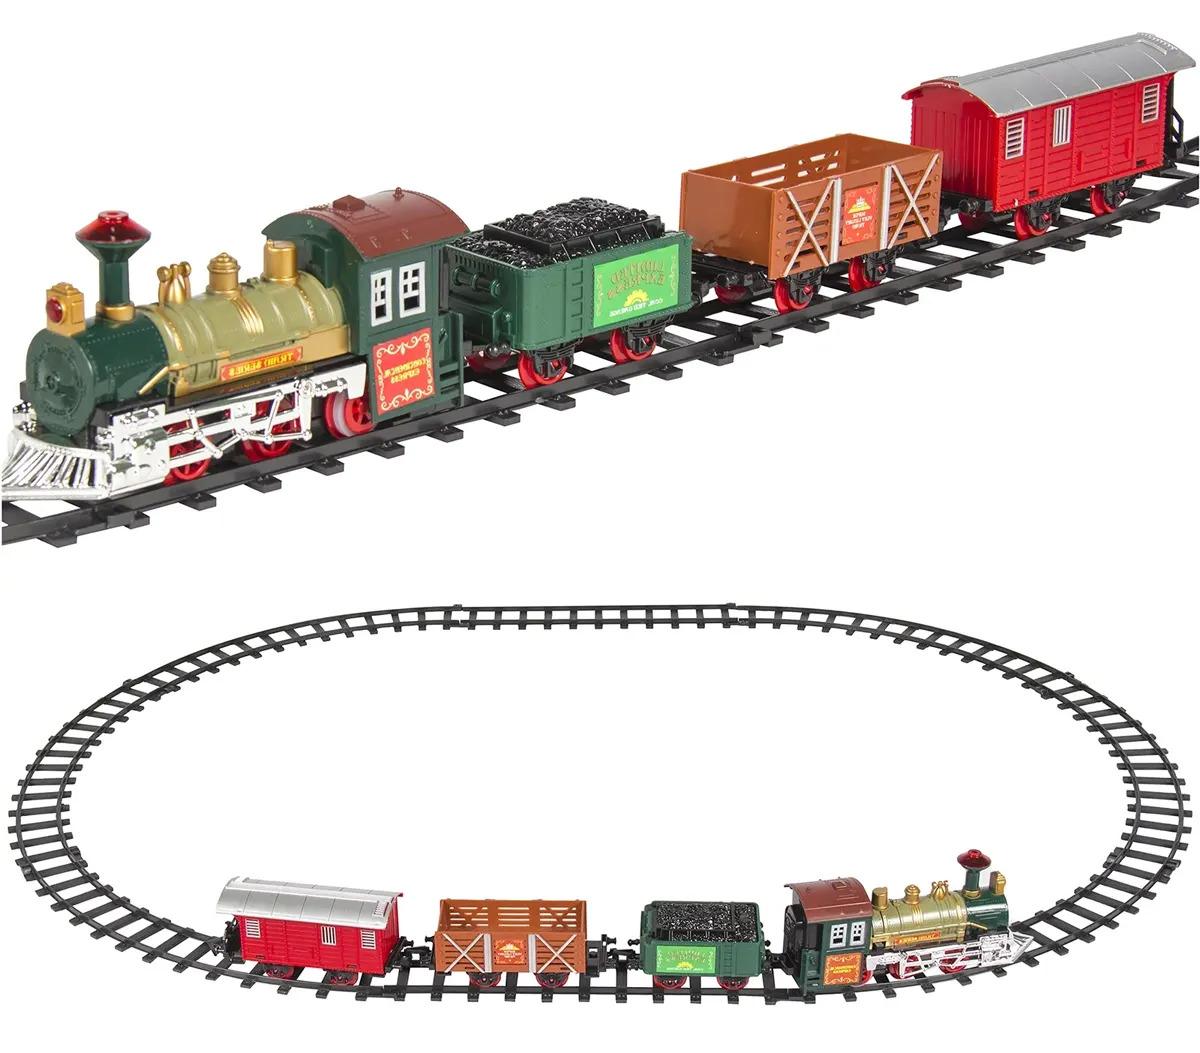 Best Choice Kids Electric Railway Train Car Track Play Set with Music for $9.99